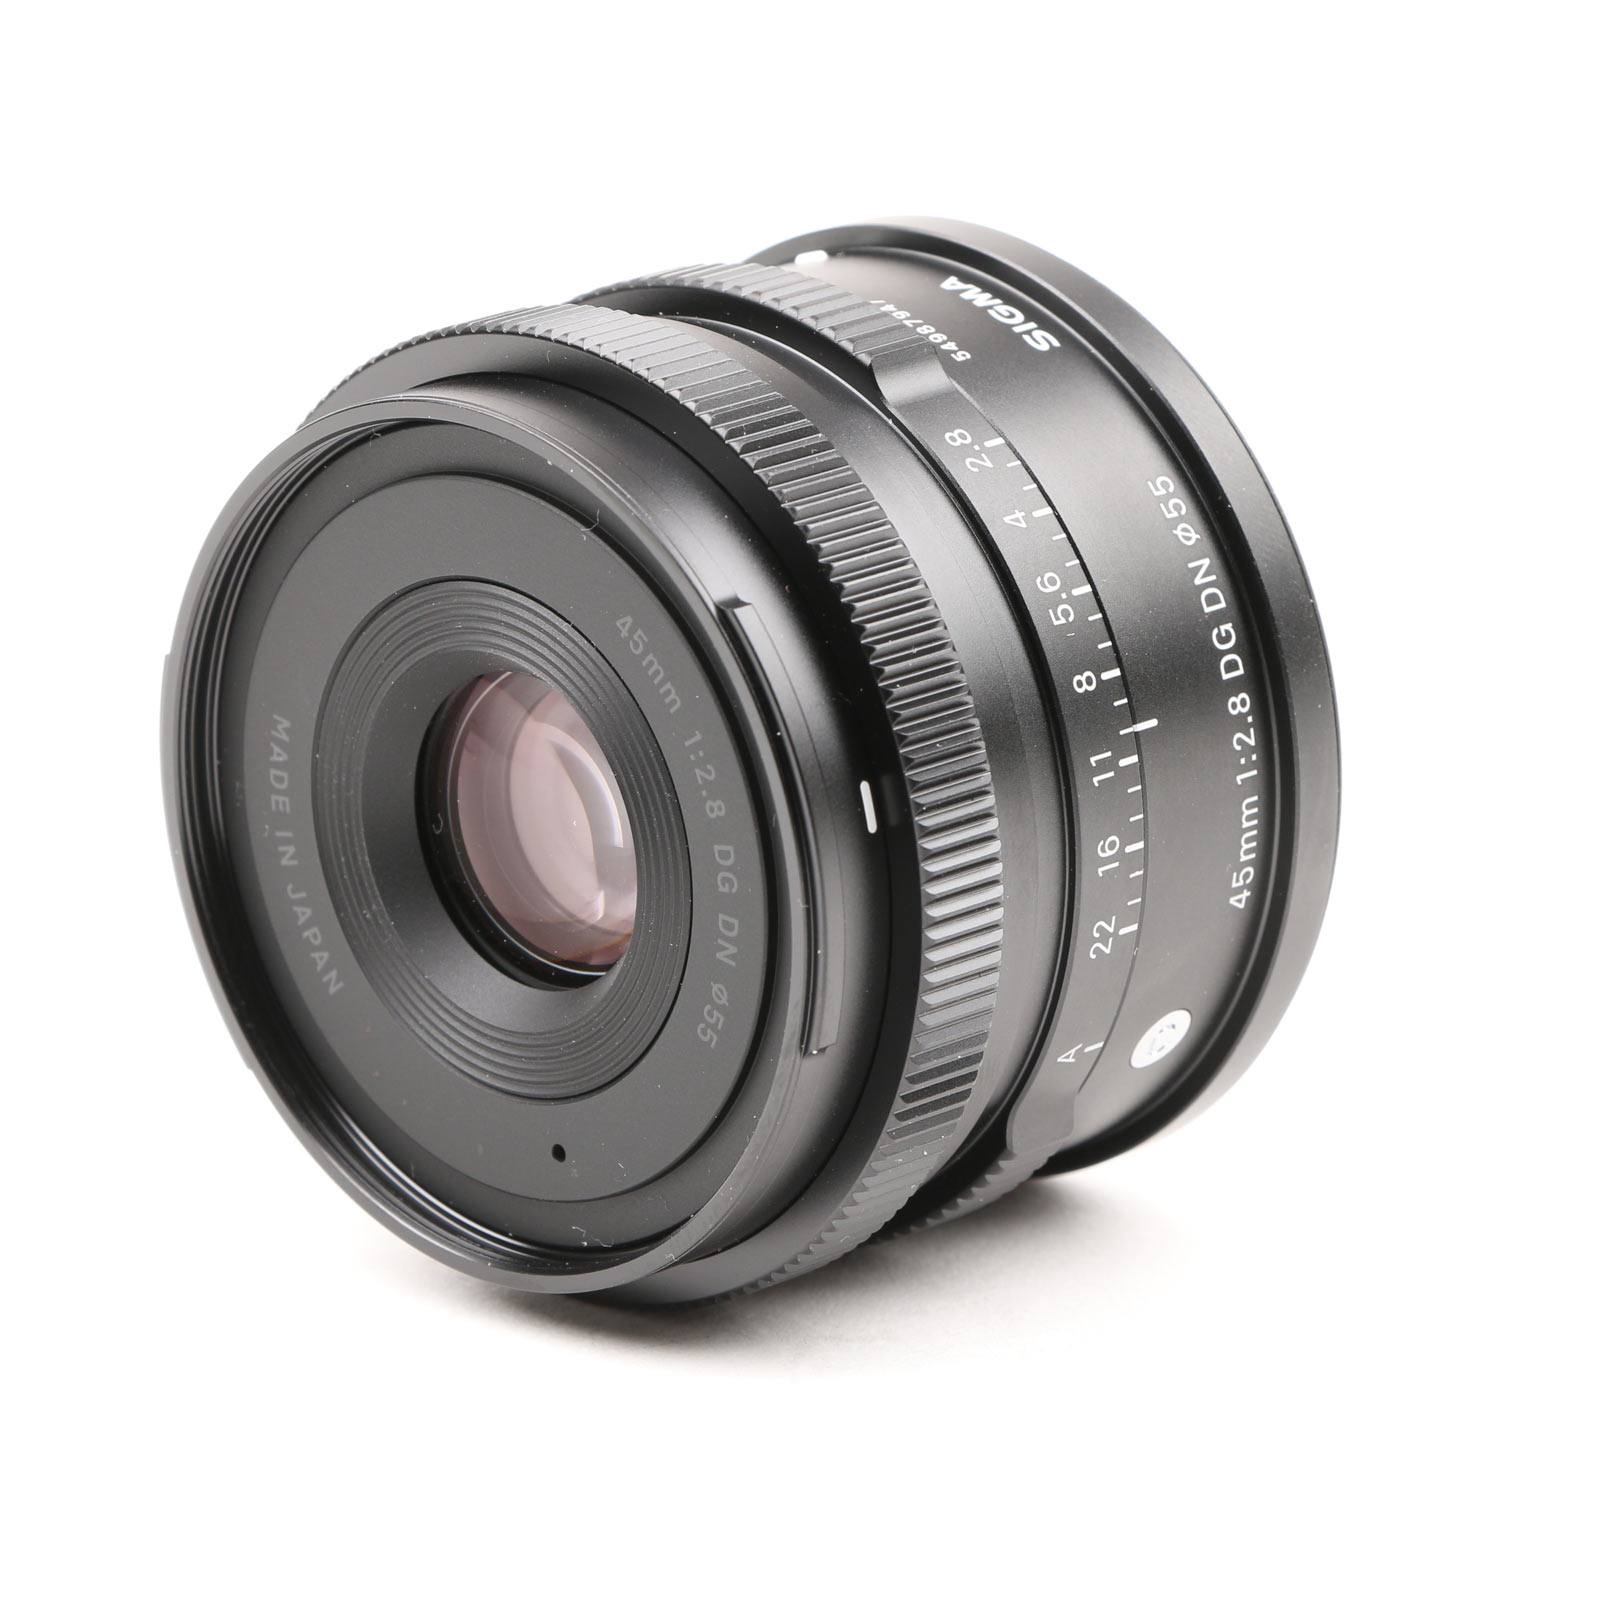 Used Sigma 45mm f2.8 DG DN Contemporary Lens - L-Mount | Wex Photo Video